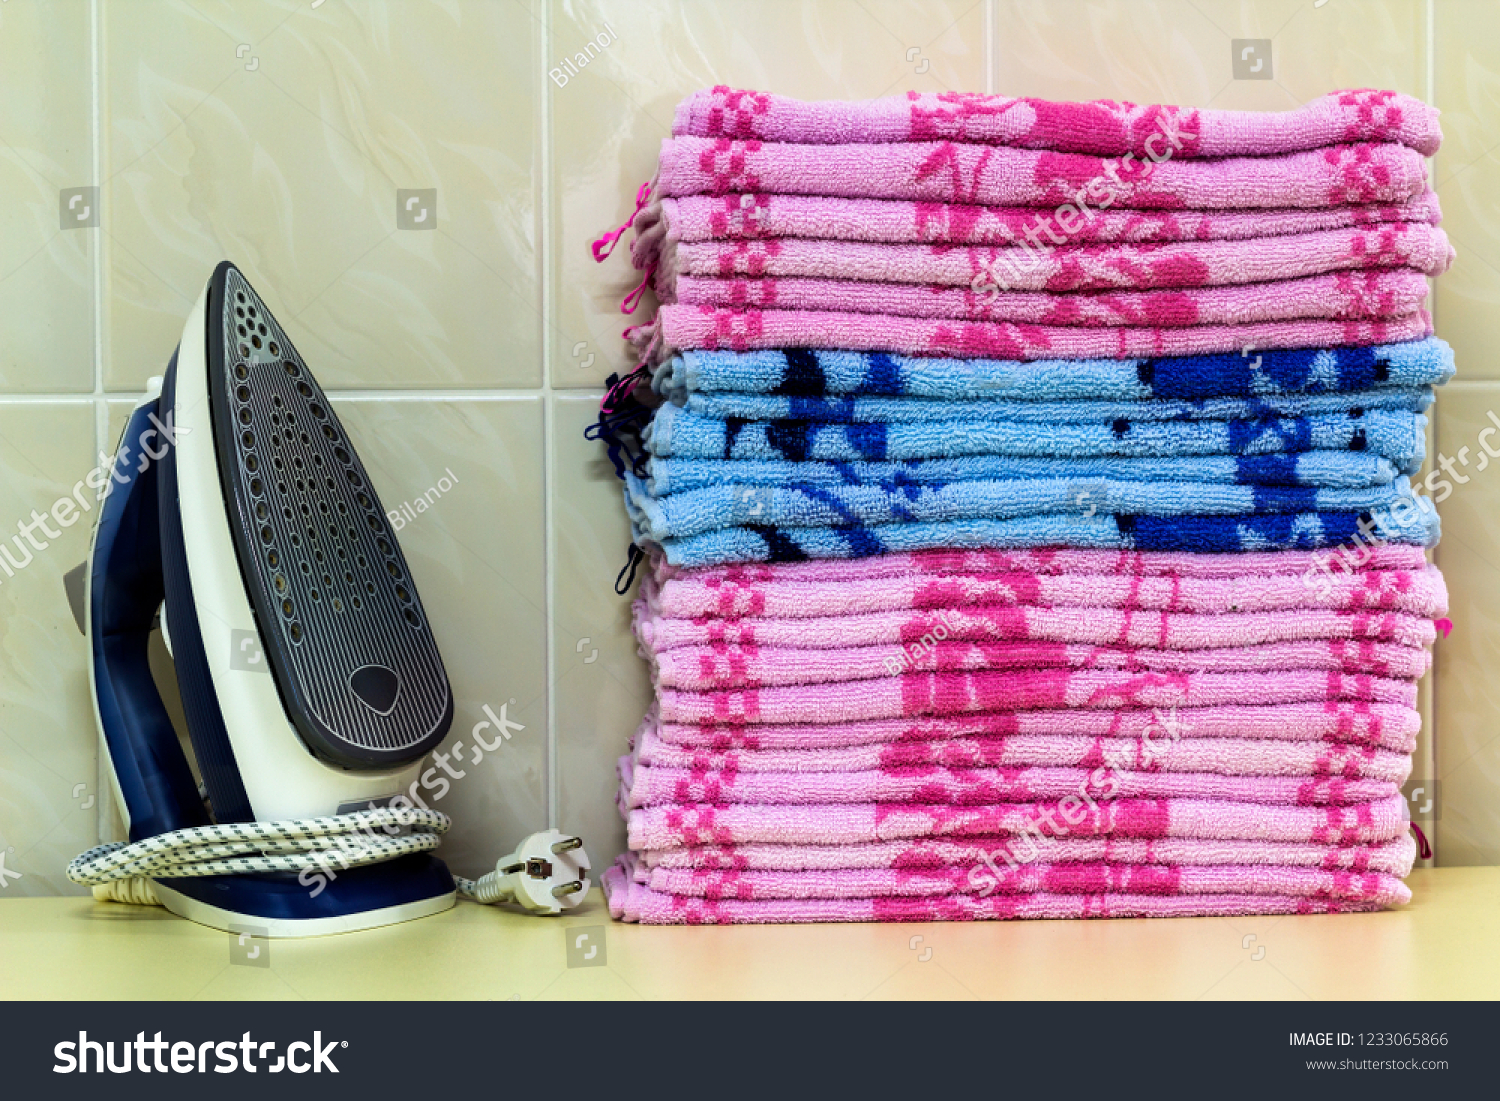 Ironing linen with steam generator. A stack of ironed towels lying next to the iron. Teflon sole plate covered with small holes. #1233065866